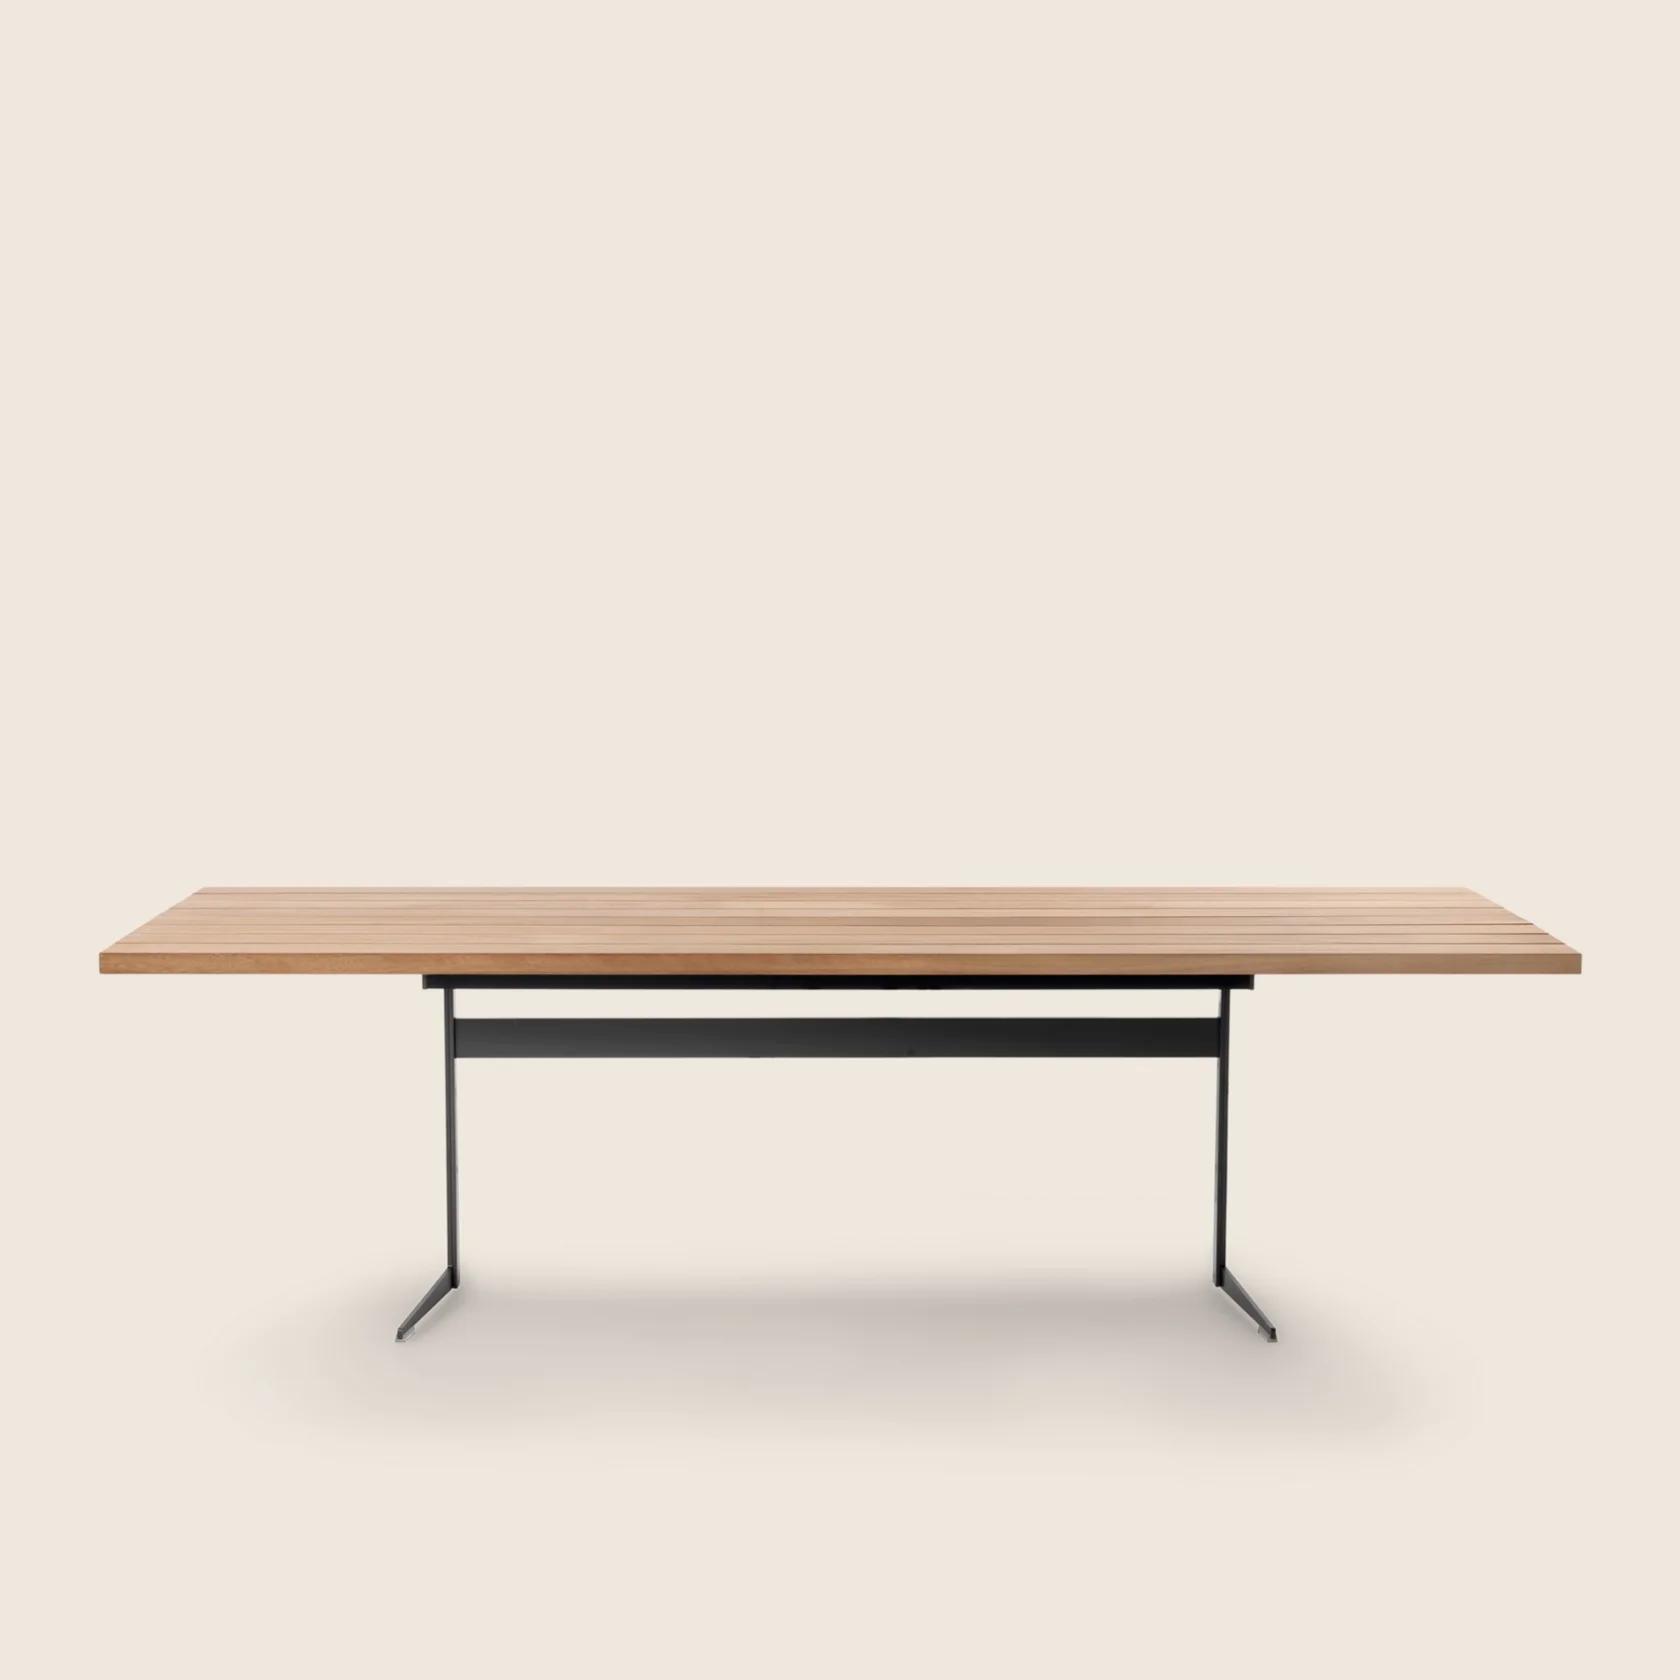 014XL8_FLY OUTDOOR_TABLE_03.png